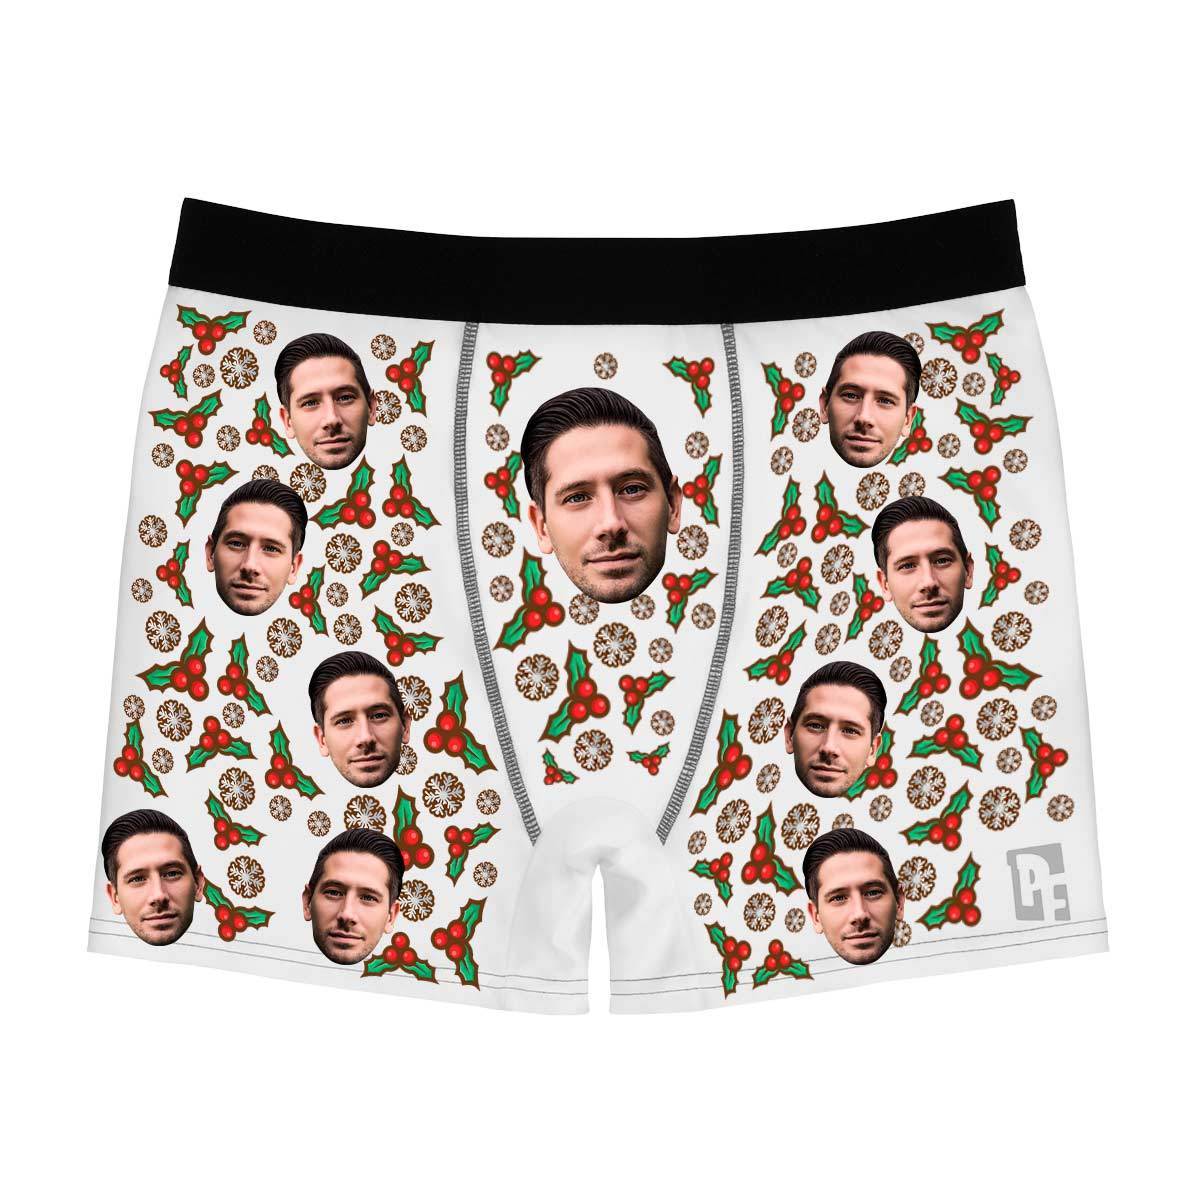 White Mistletoe men's boxer briefs personalized with photo printed on them